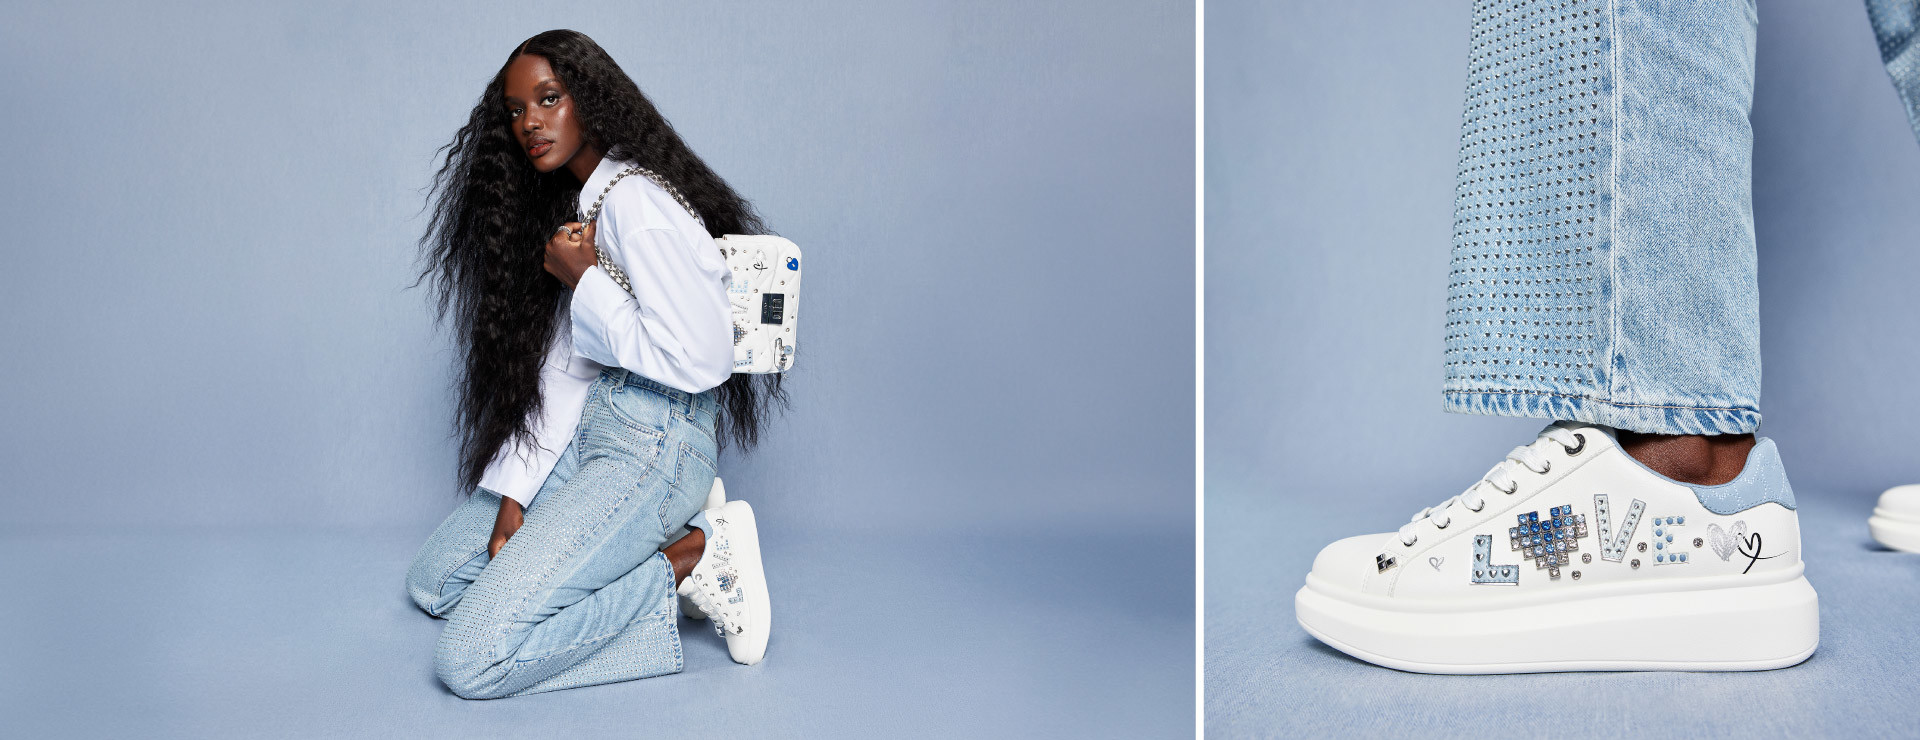 afro-descendant model wearing jeans and sneakers with matching bag with shiny stone details on a blue background